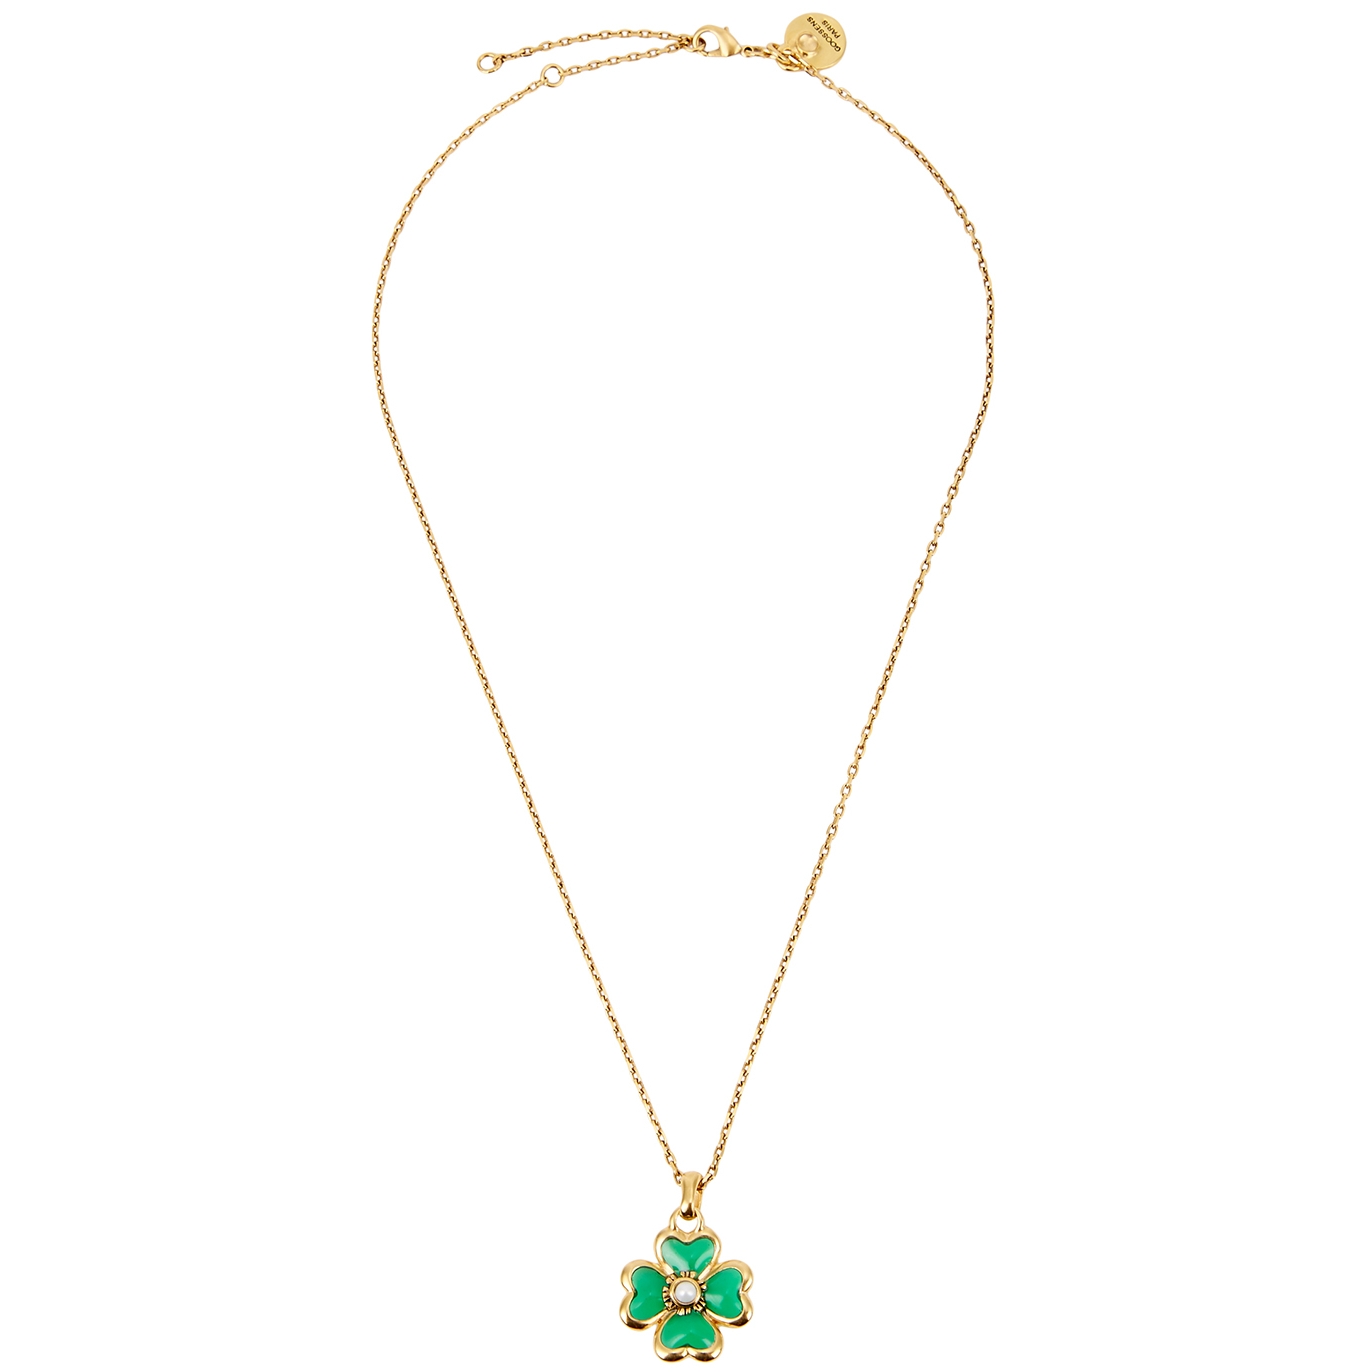 Goossens Talisman Clover 24kt Gold-dipped Necklace - Green - One Size